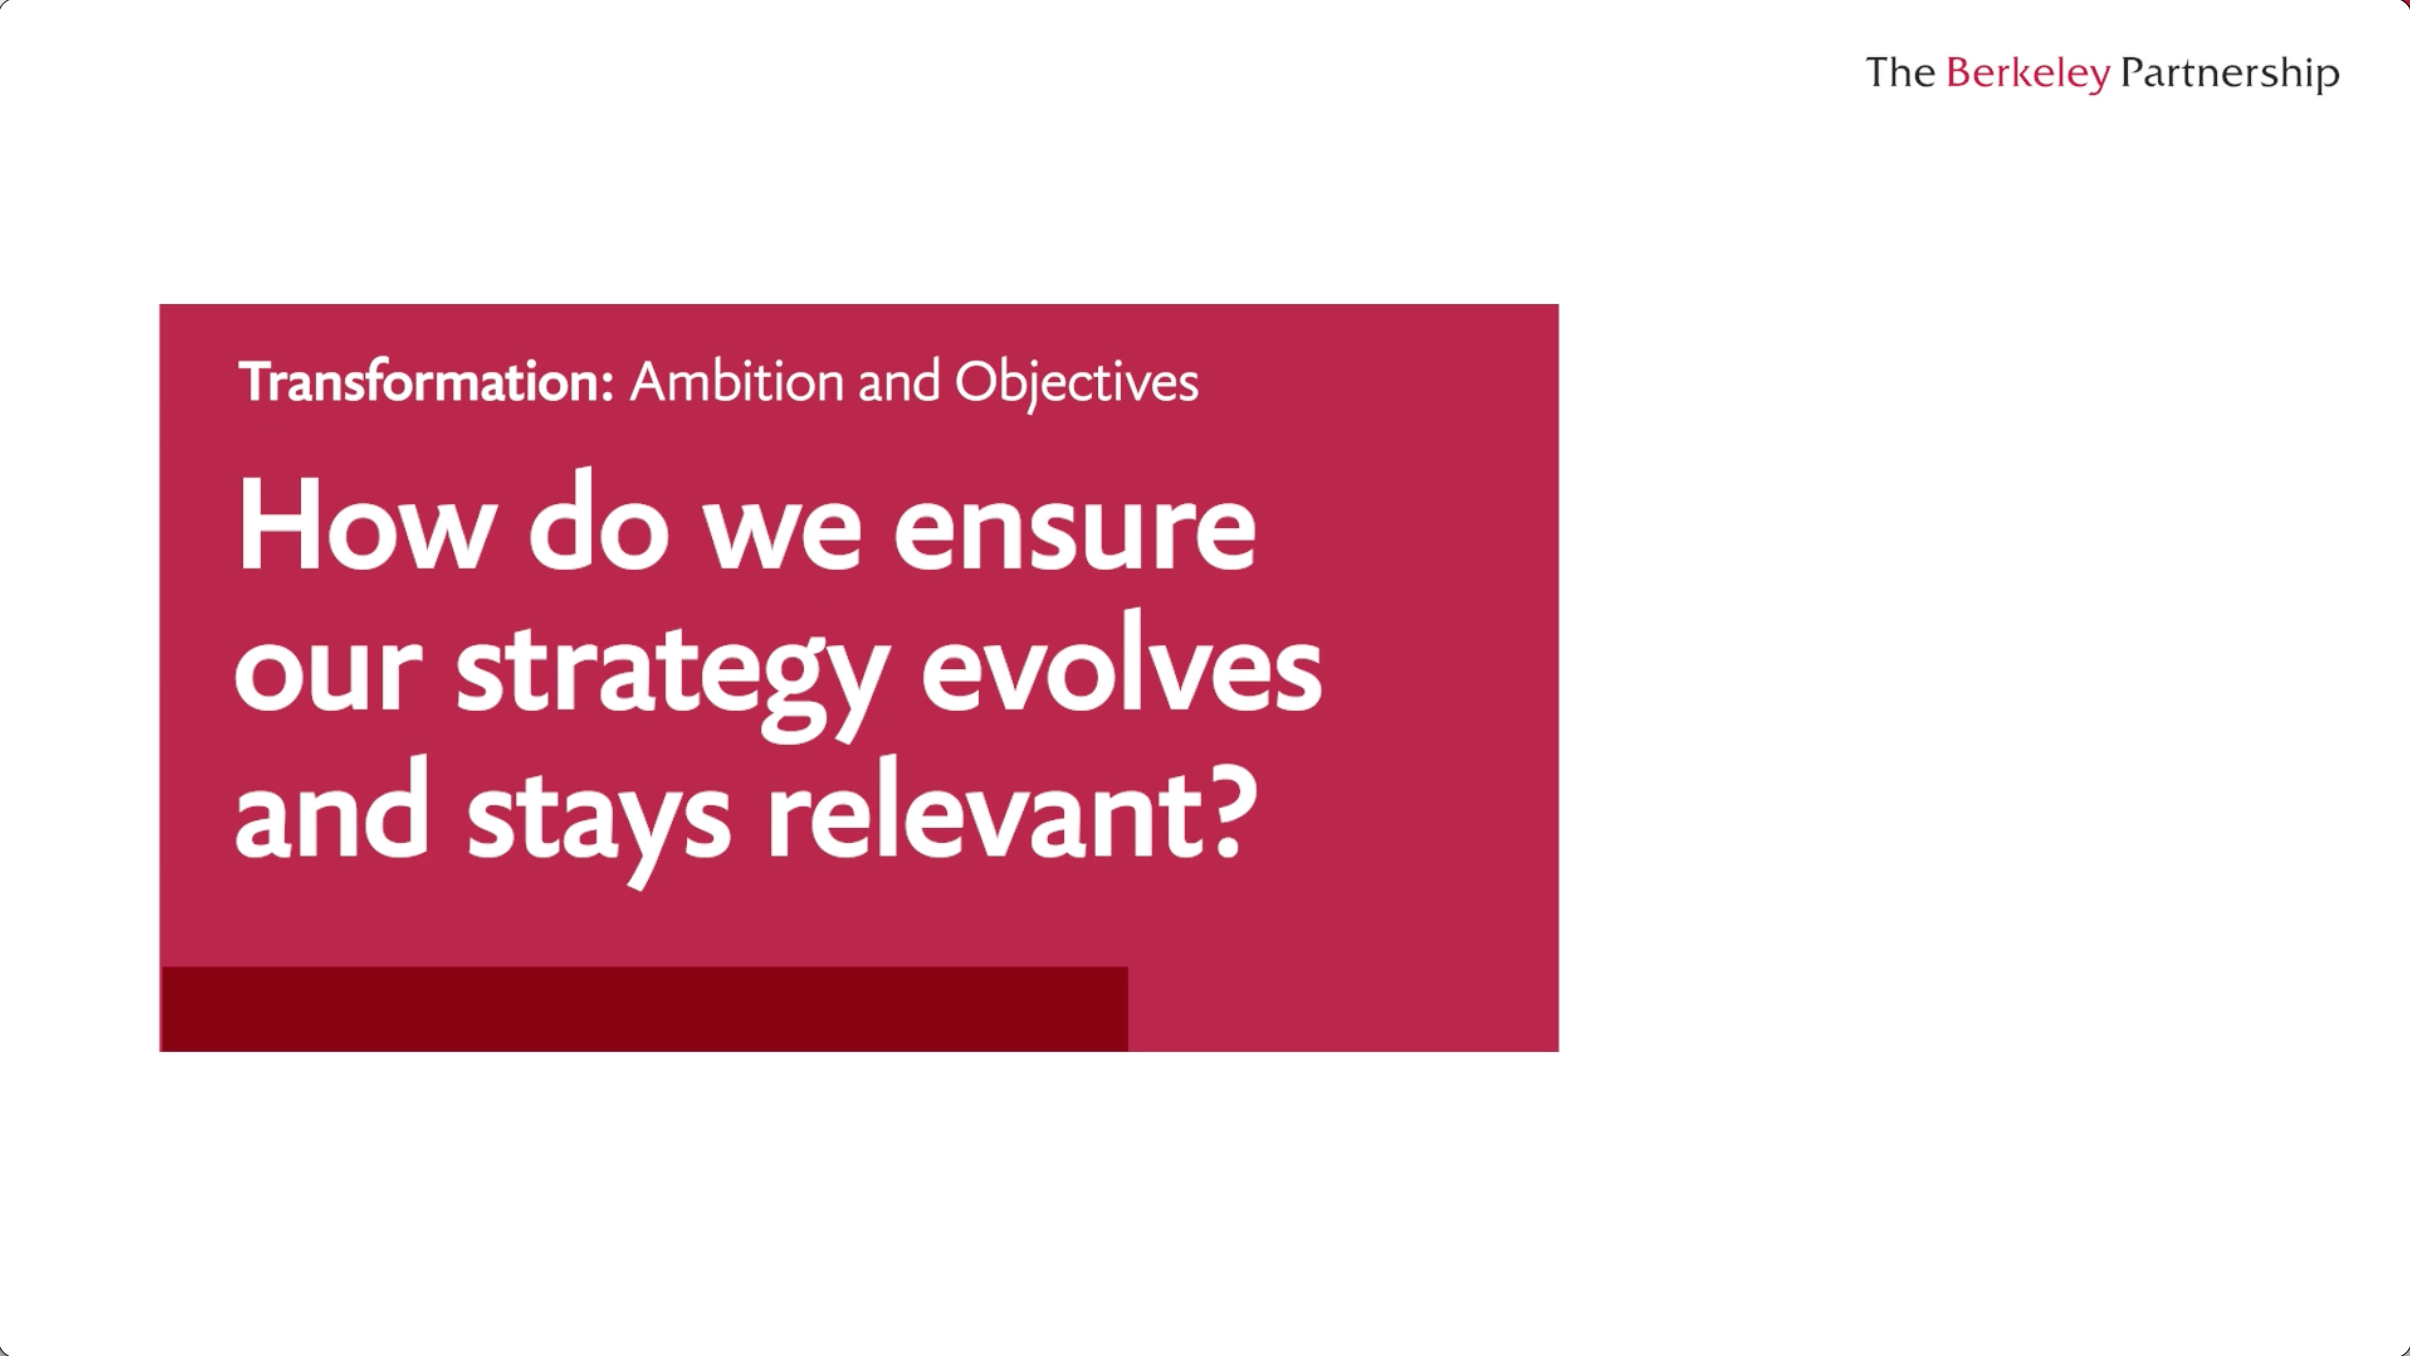 How do we ensure our strategy evolves and stays relevant?